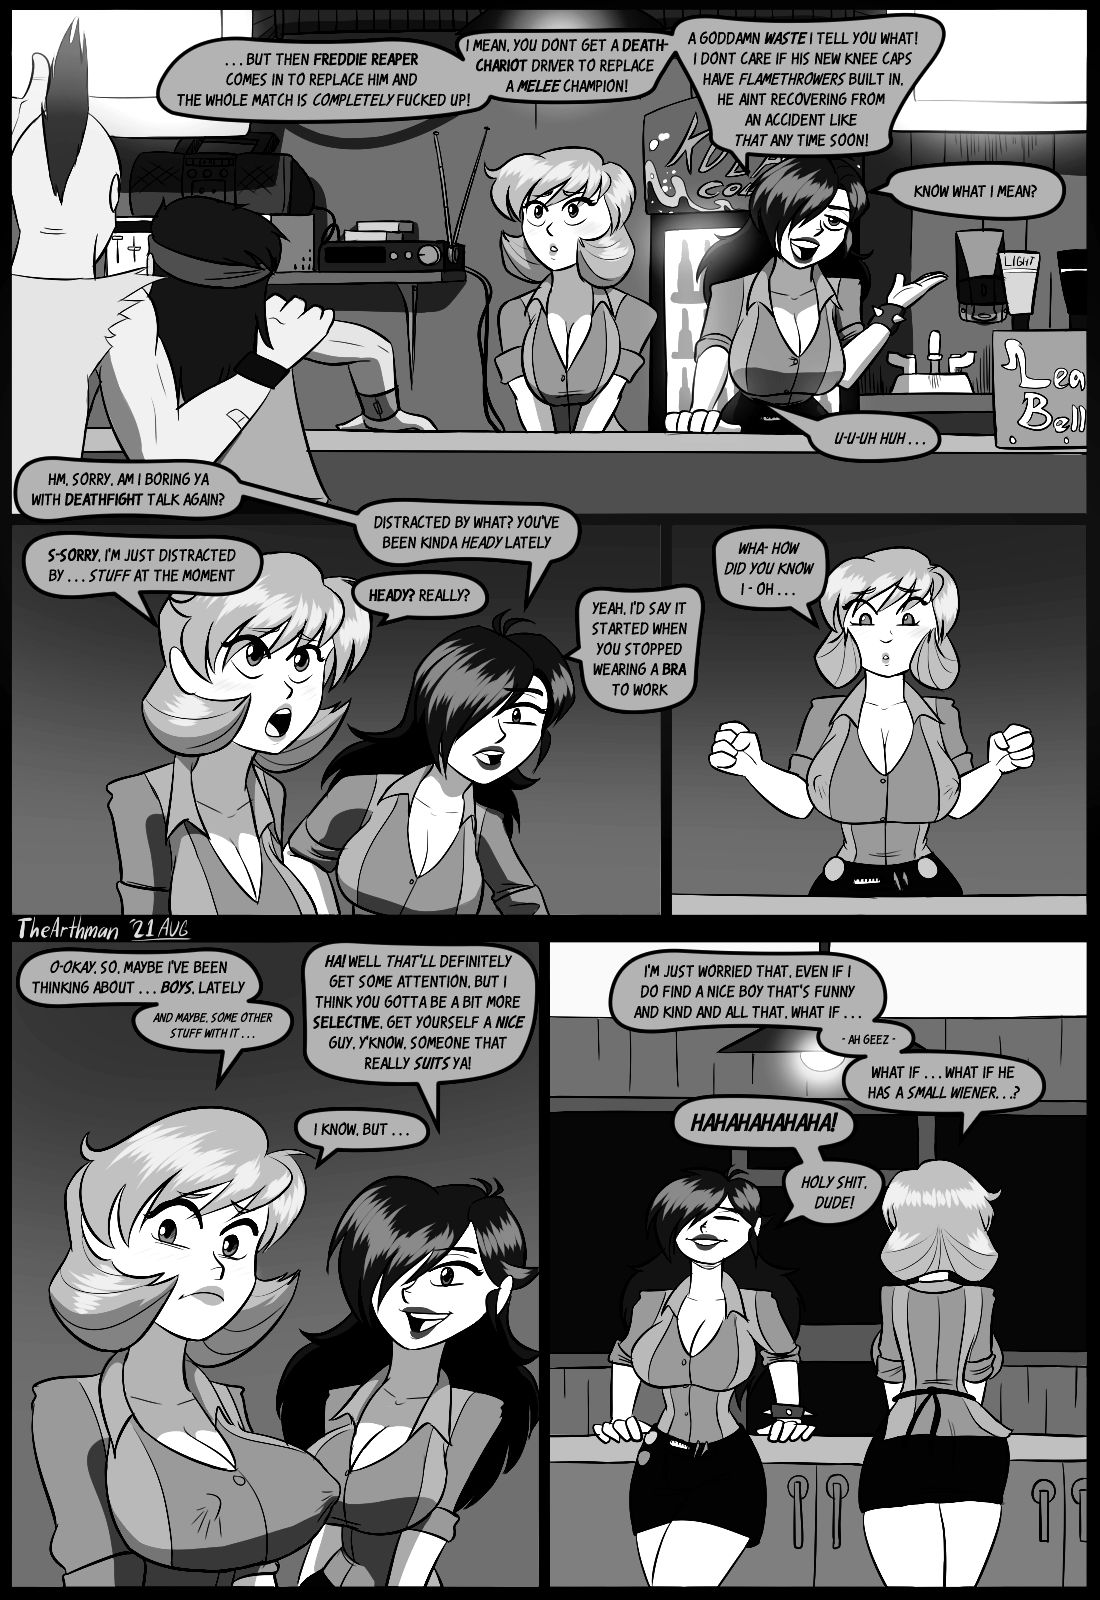 Dirtwater - Part 5 - One Night at Louie’s Porn Comic english 05